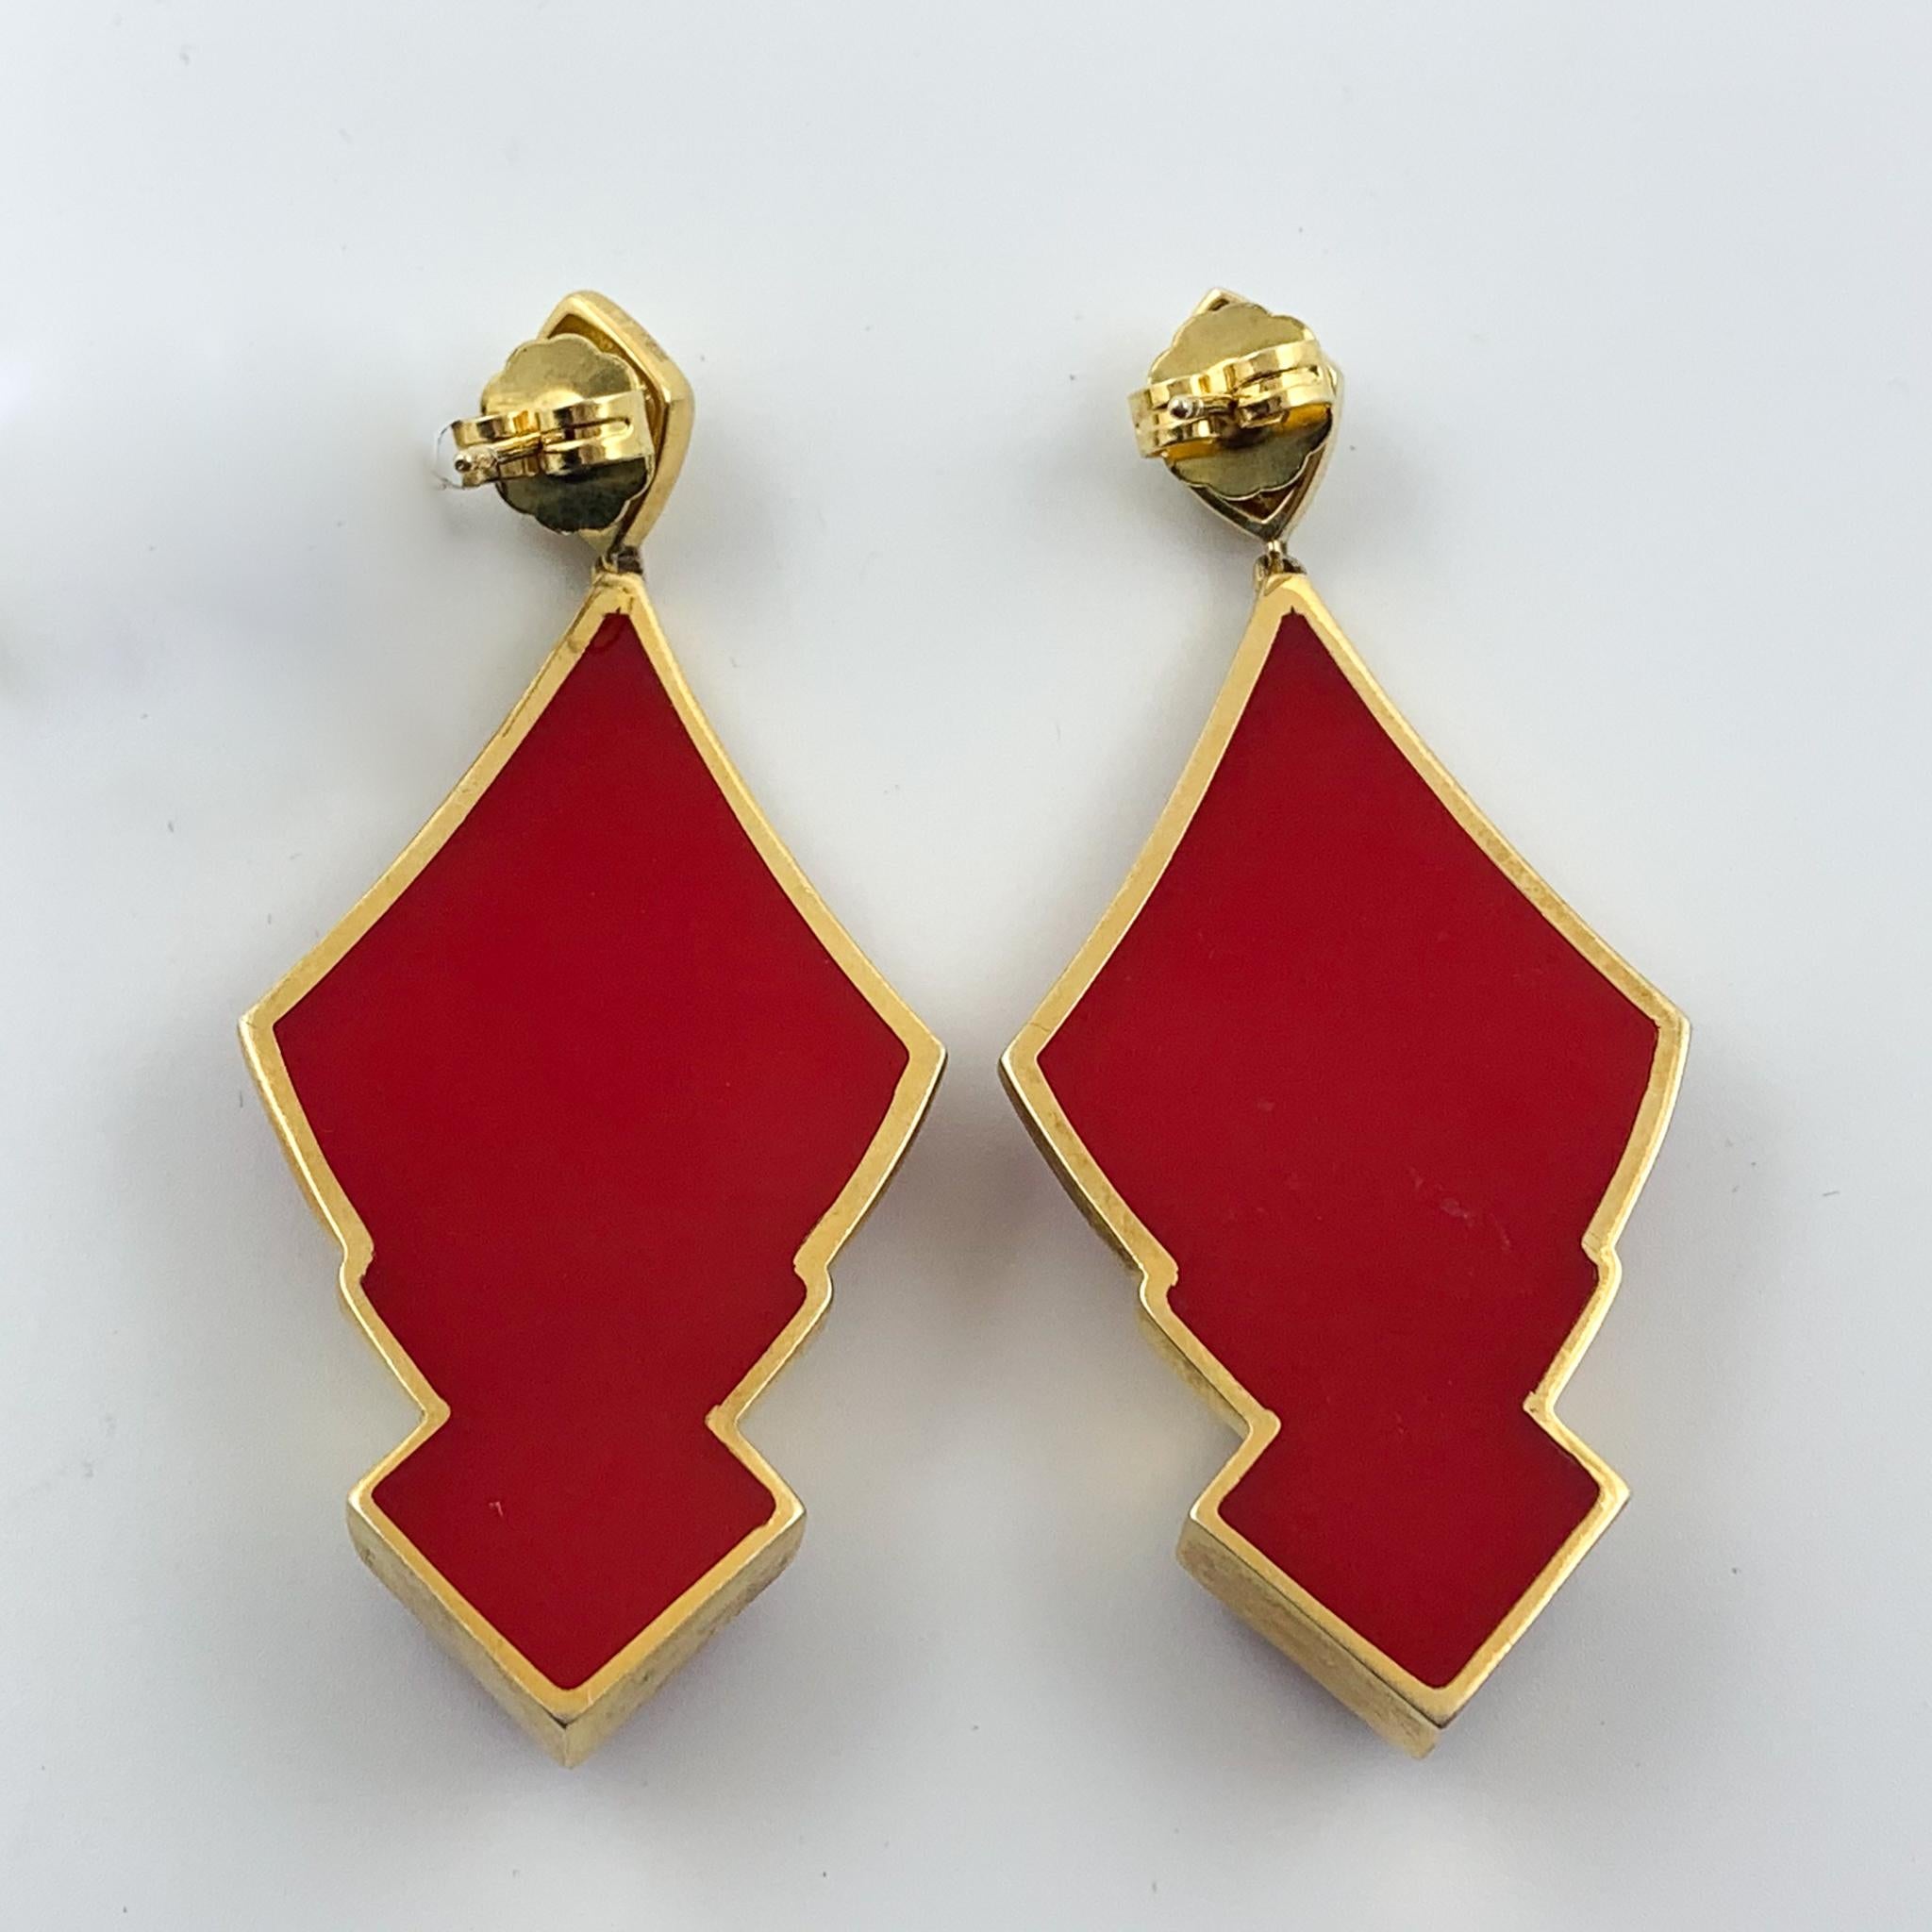 Cristina Sabatini design 
Art Deco Style
Gold over Silver, Red Resin 
Dangle Earrings 
Approximately 3 inches in length 